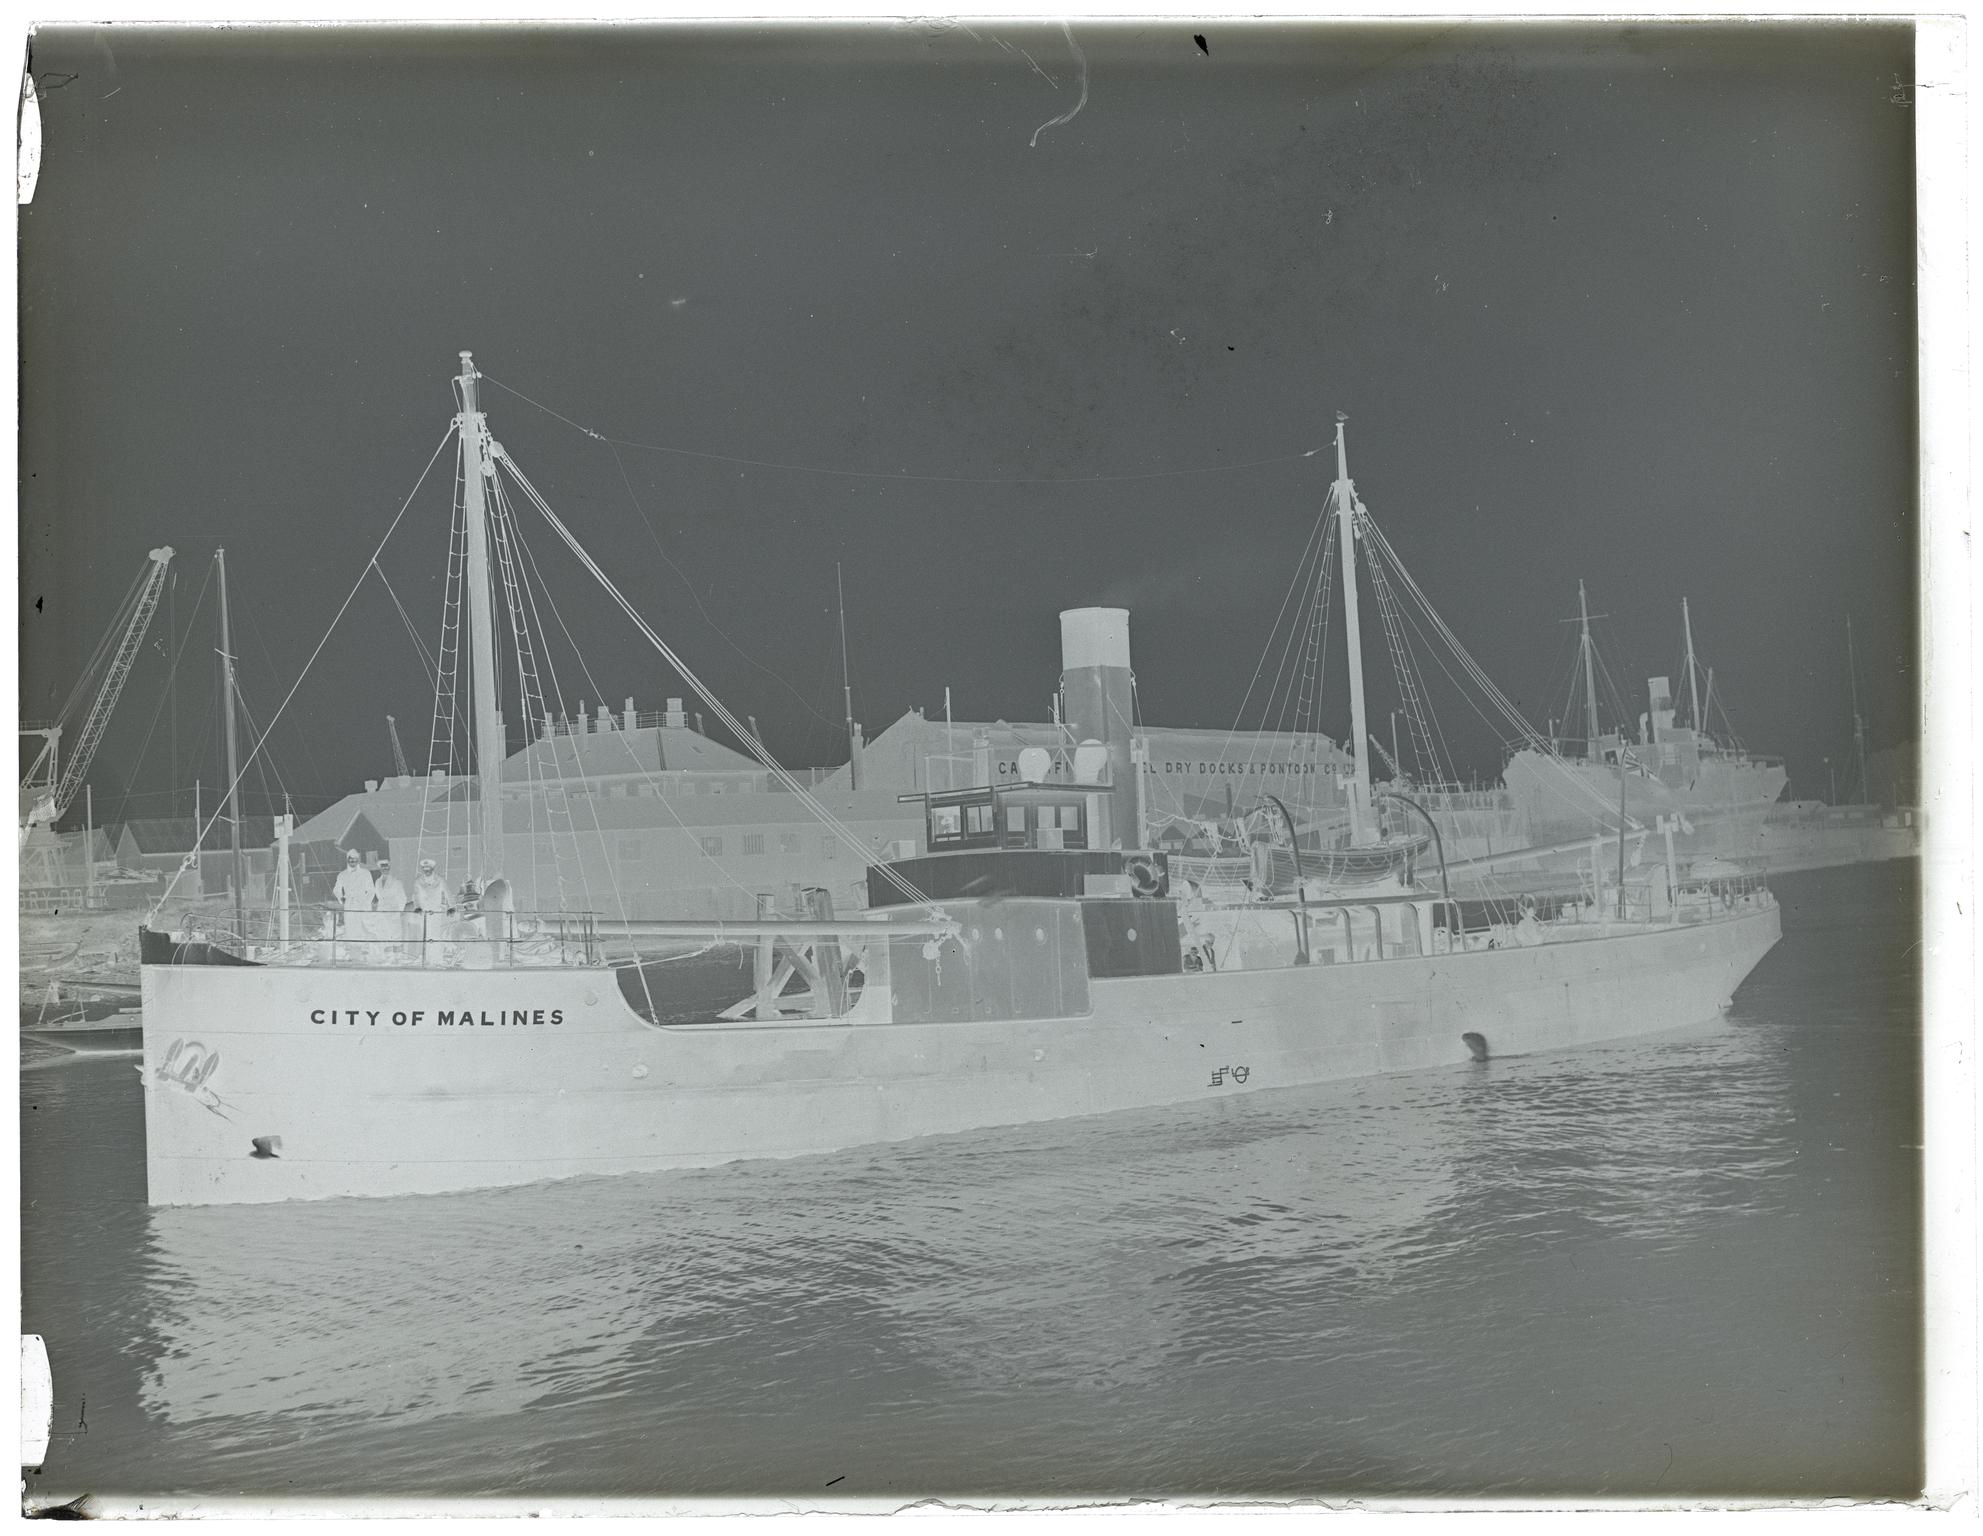 S.S. CITY OF MARLINES, glass negative